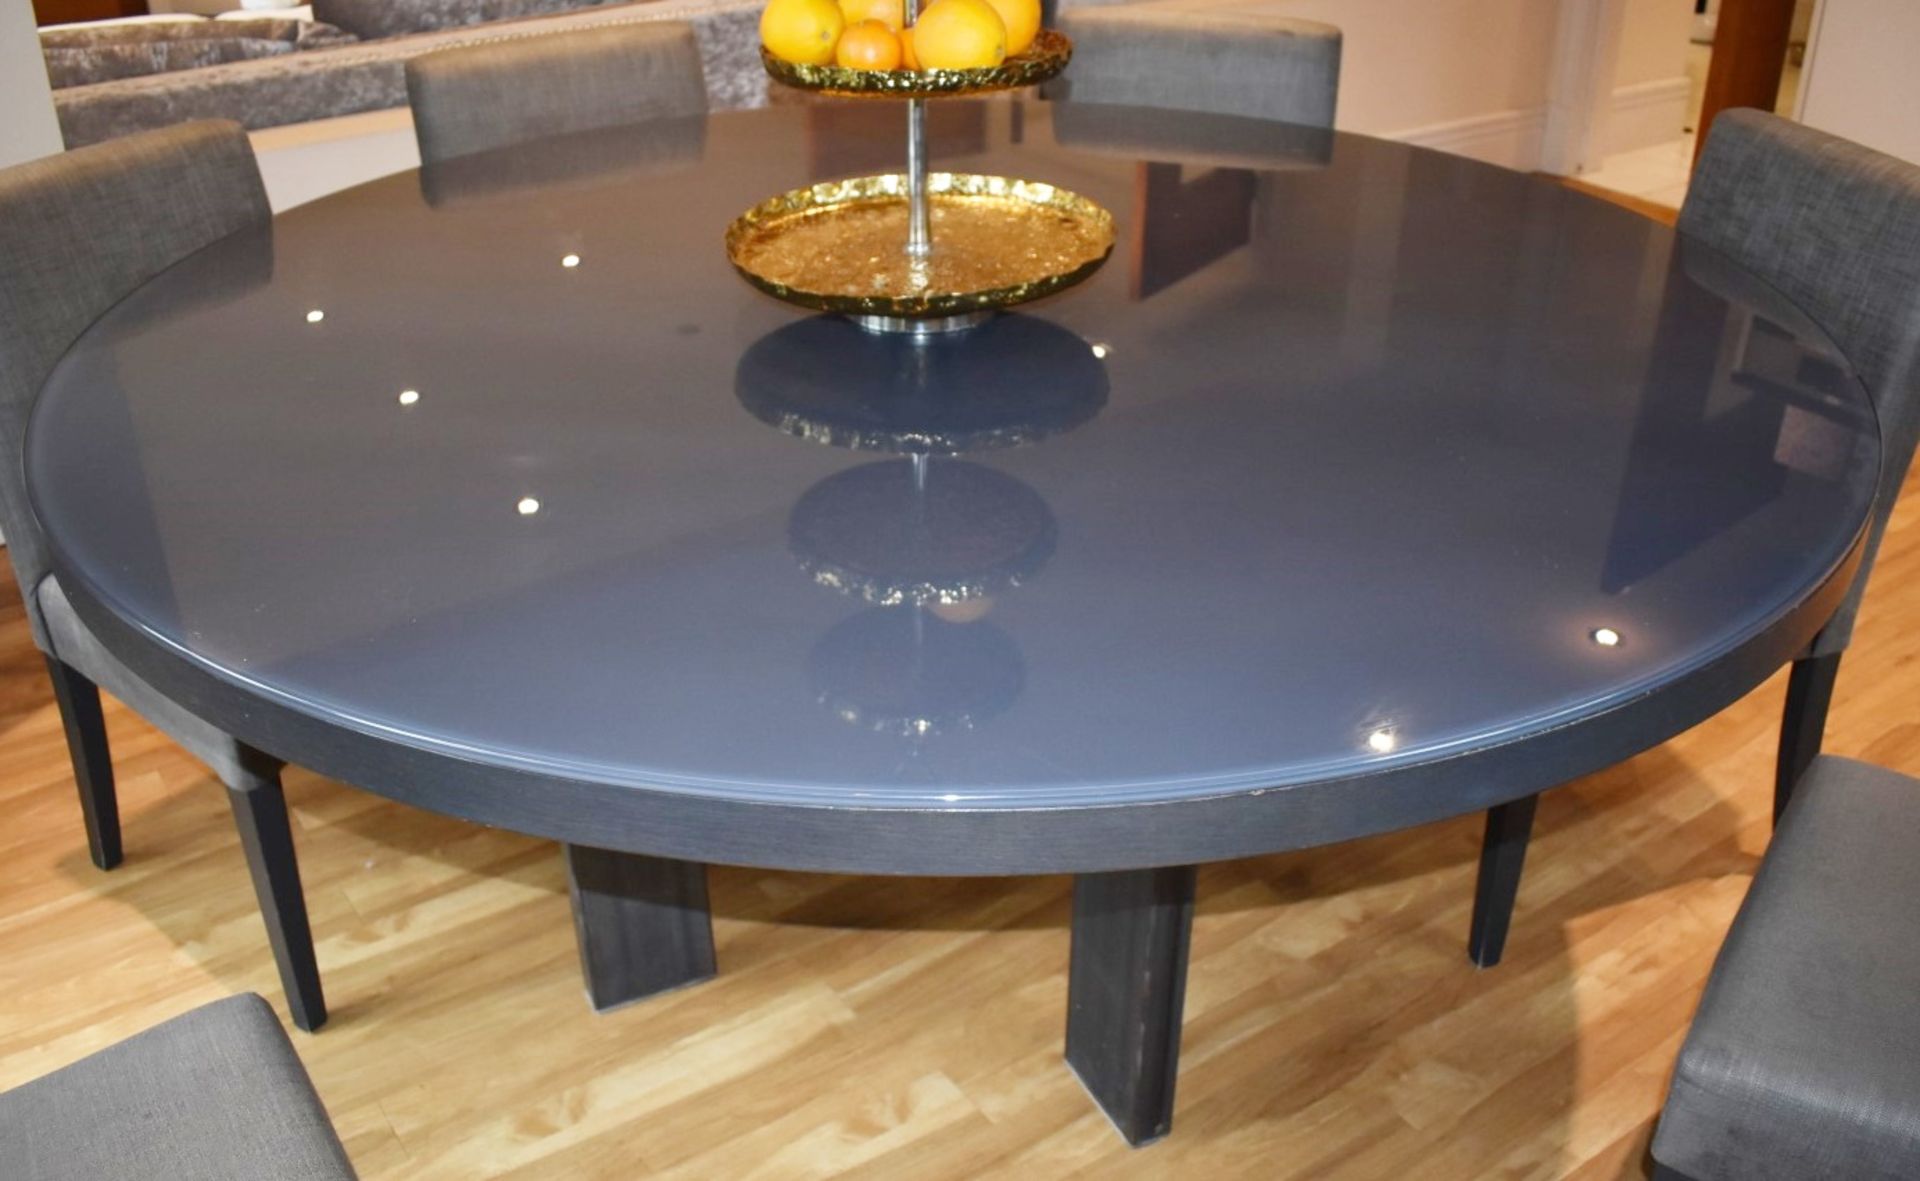 1 x Contemporary Dining Table With Six Chairs - Wenge Wood Round Table With Glass Protector and - Image 3 of 14